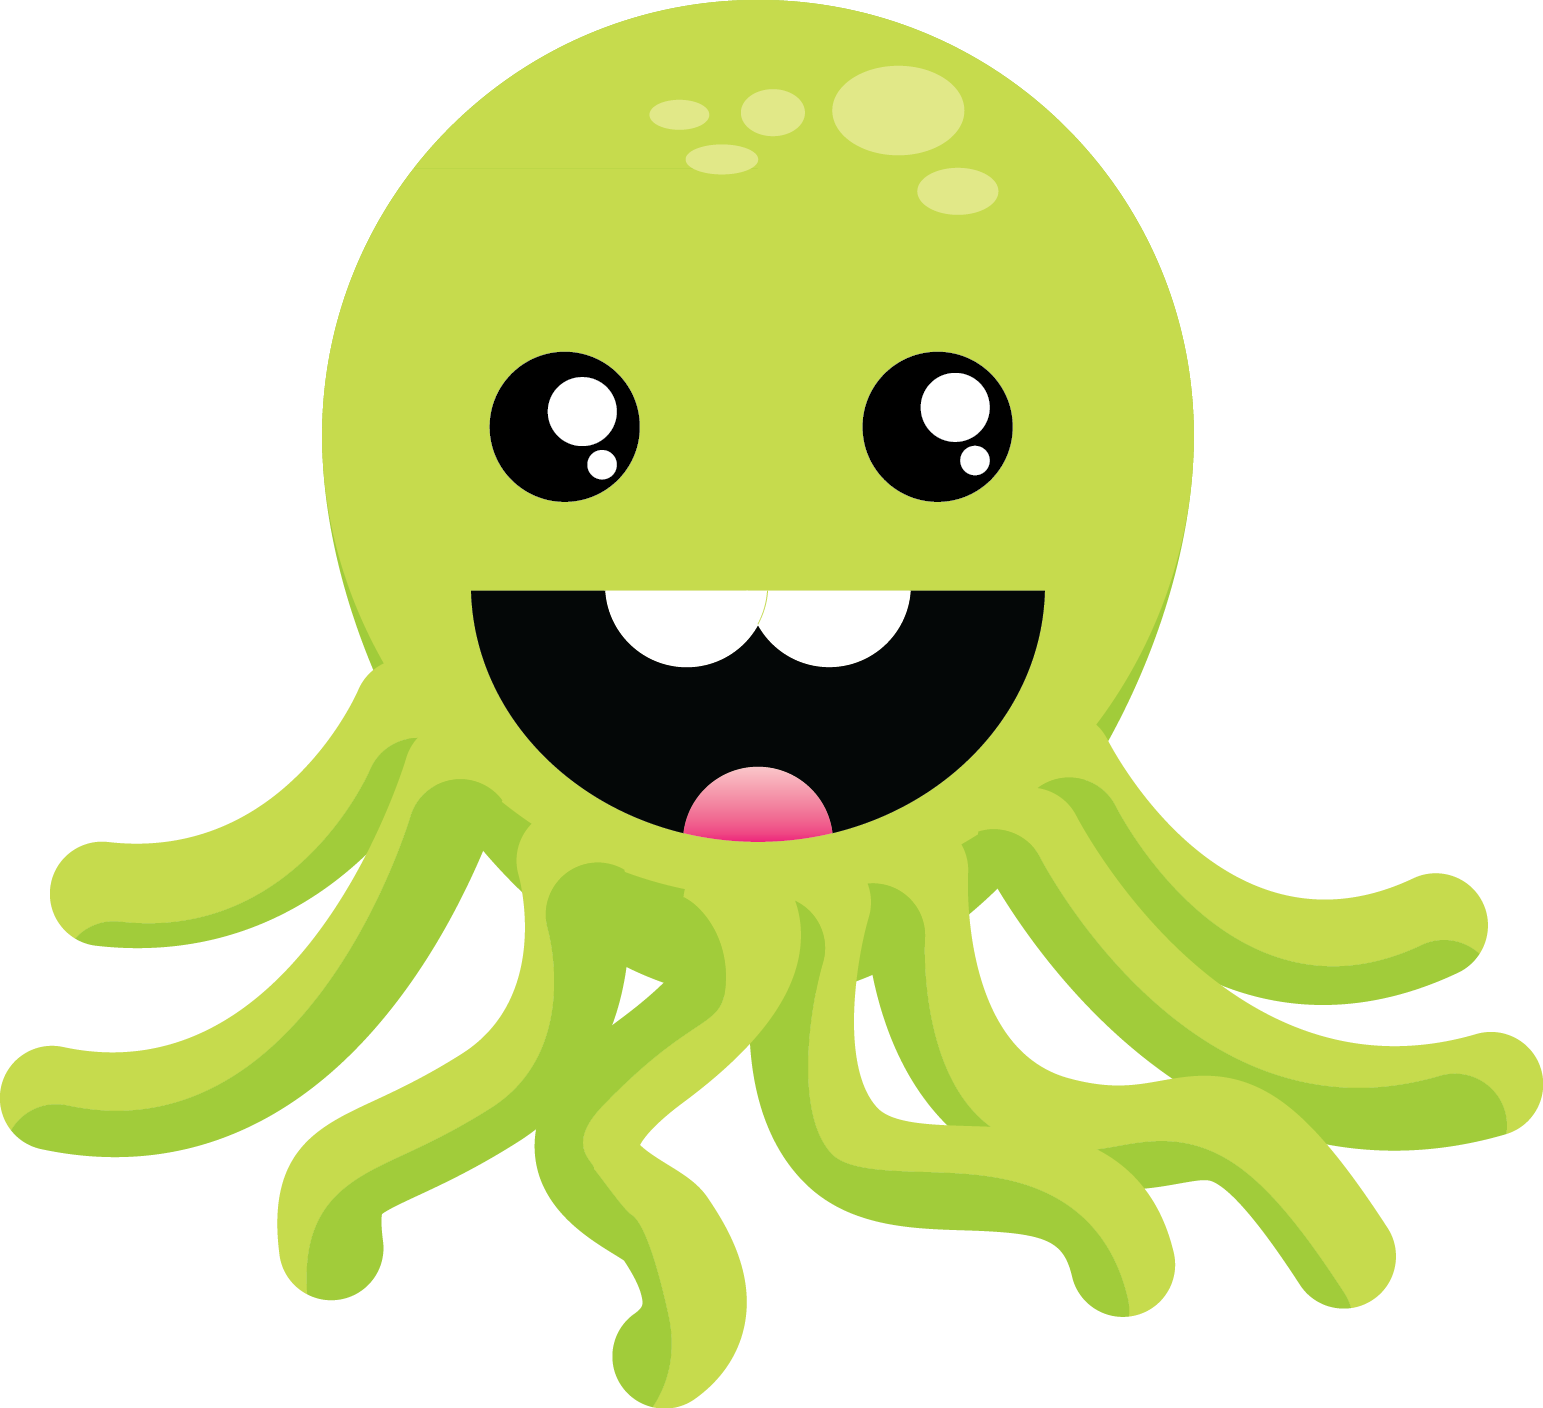 Cute Octopus Image PNG Image